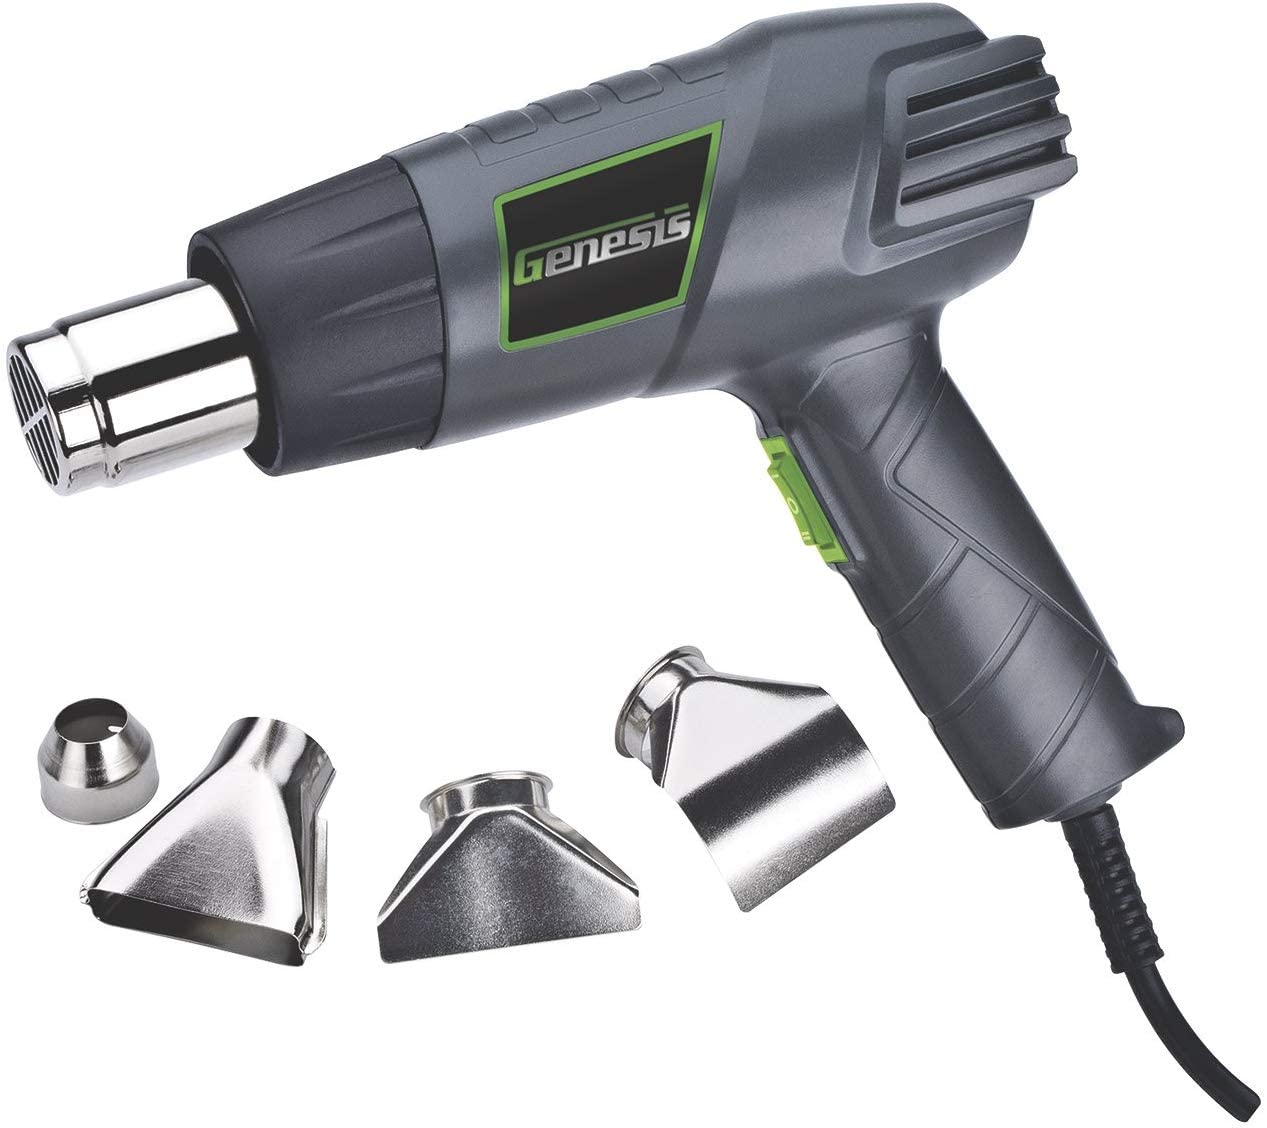 Genesis GHG1500A Dual Temperature Heat Gun Kit With Fast Heat High And Low Settings 572F/1000F, Air Reduction Nozzle, Reflector Nozzle, And Two Deflector Nozzles with 2 Year Warranty